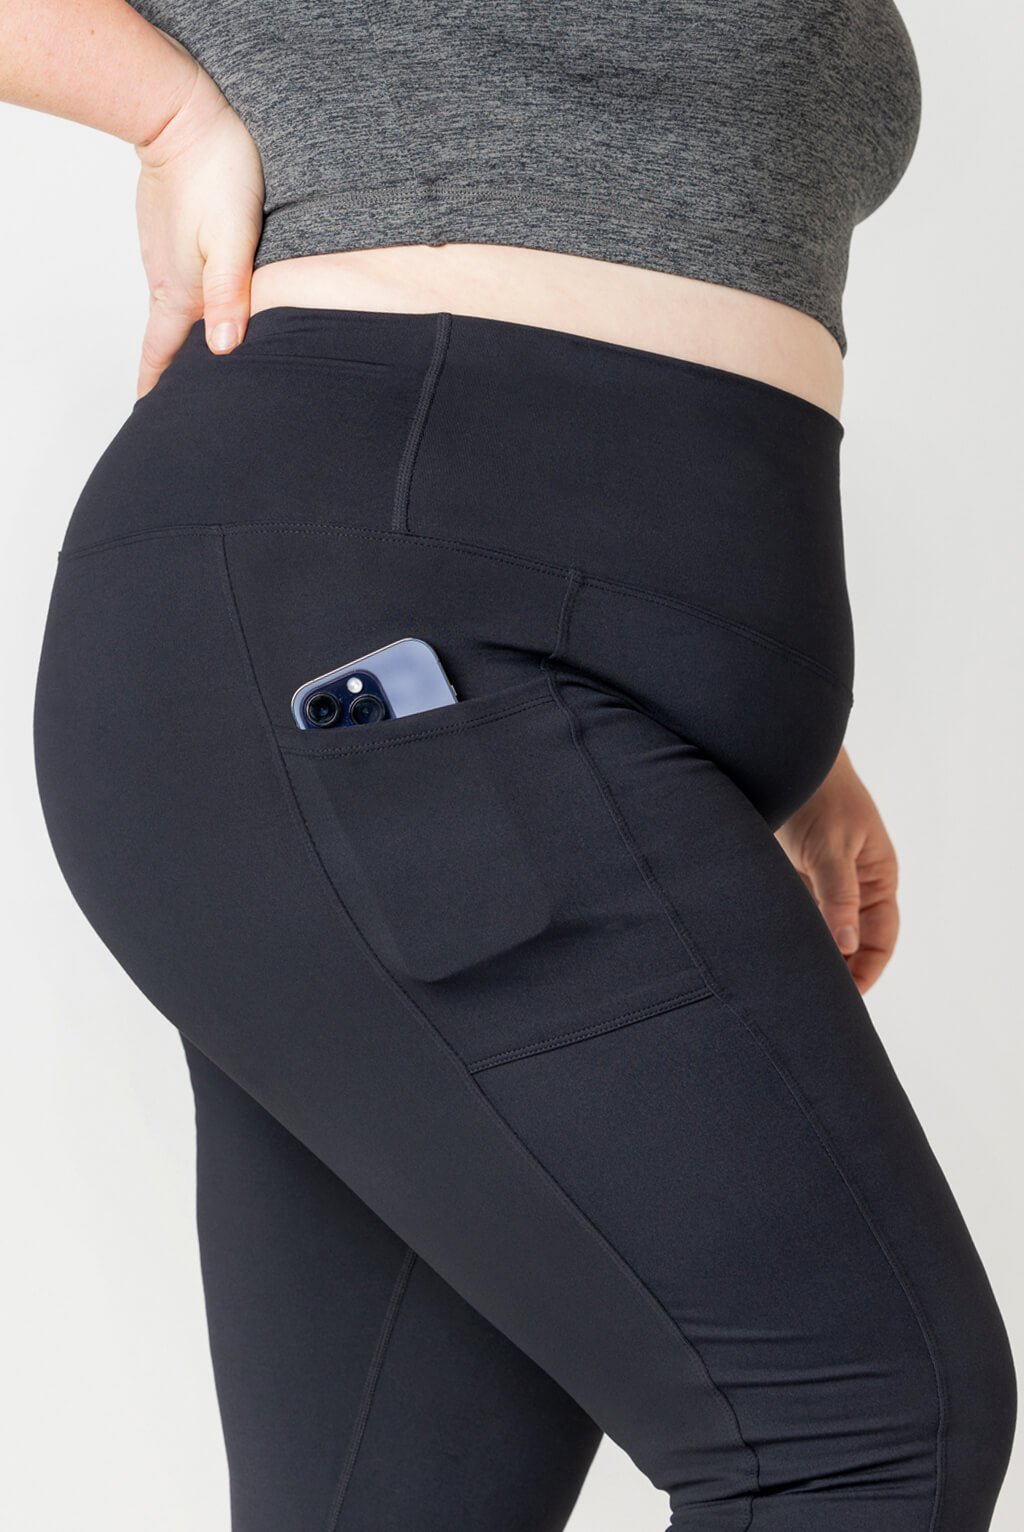 These Best-Selling Leggings with Pockets Are on Sale at Amazon